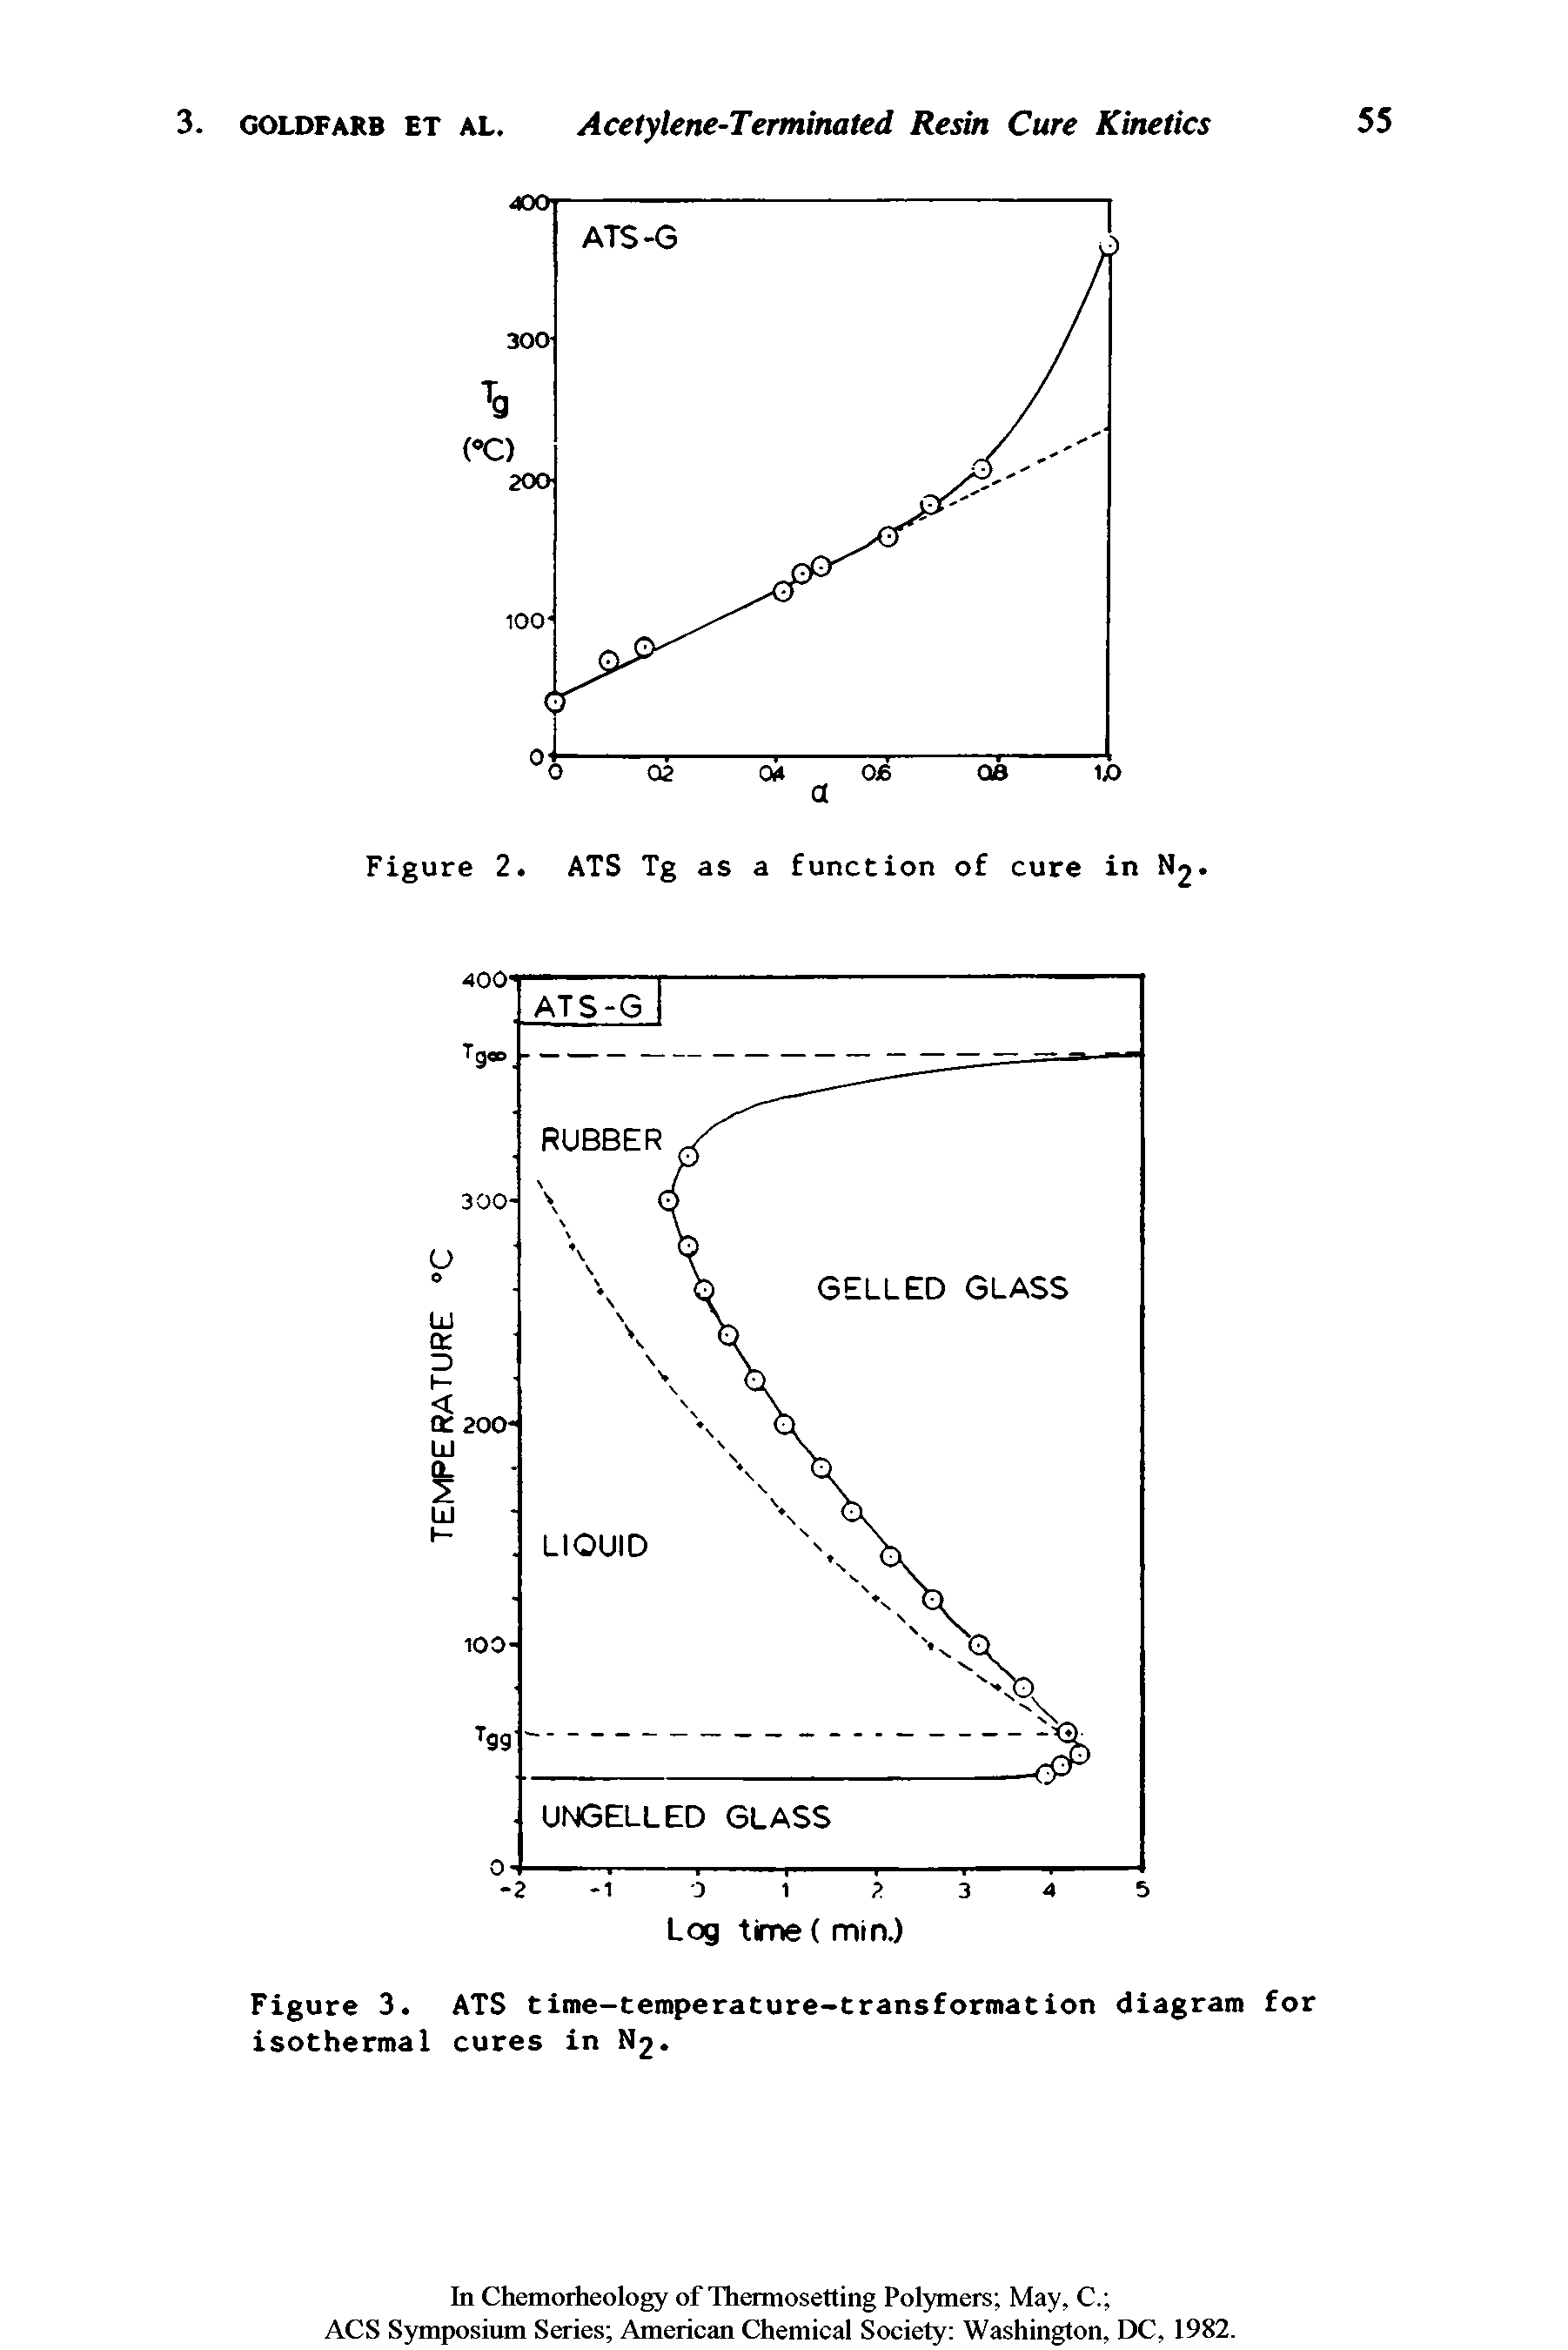 Figure 3. ATS time-temperature-transformation diagram for isothermal cures in N2.